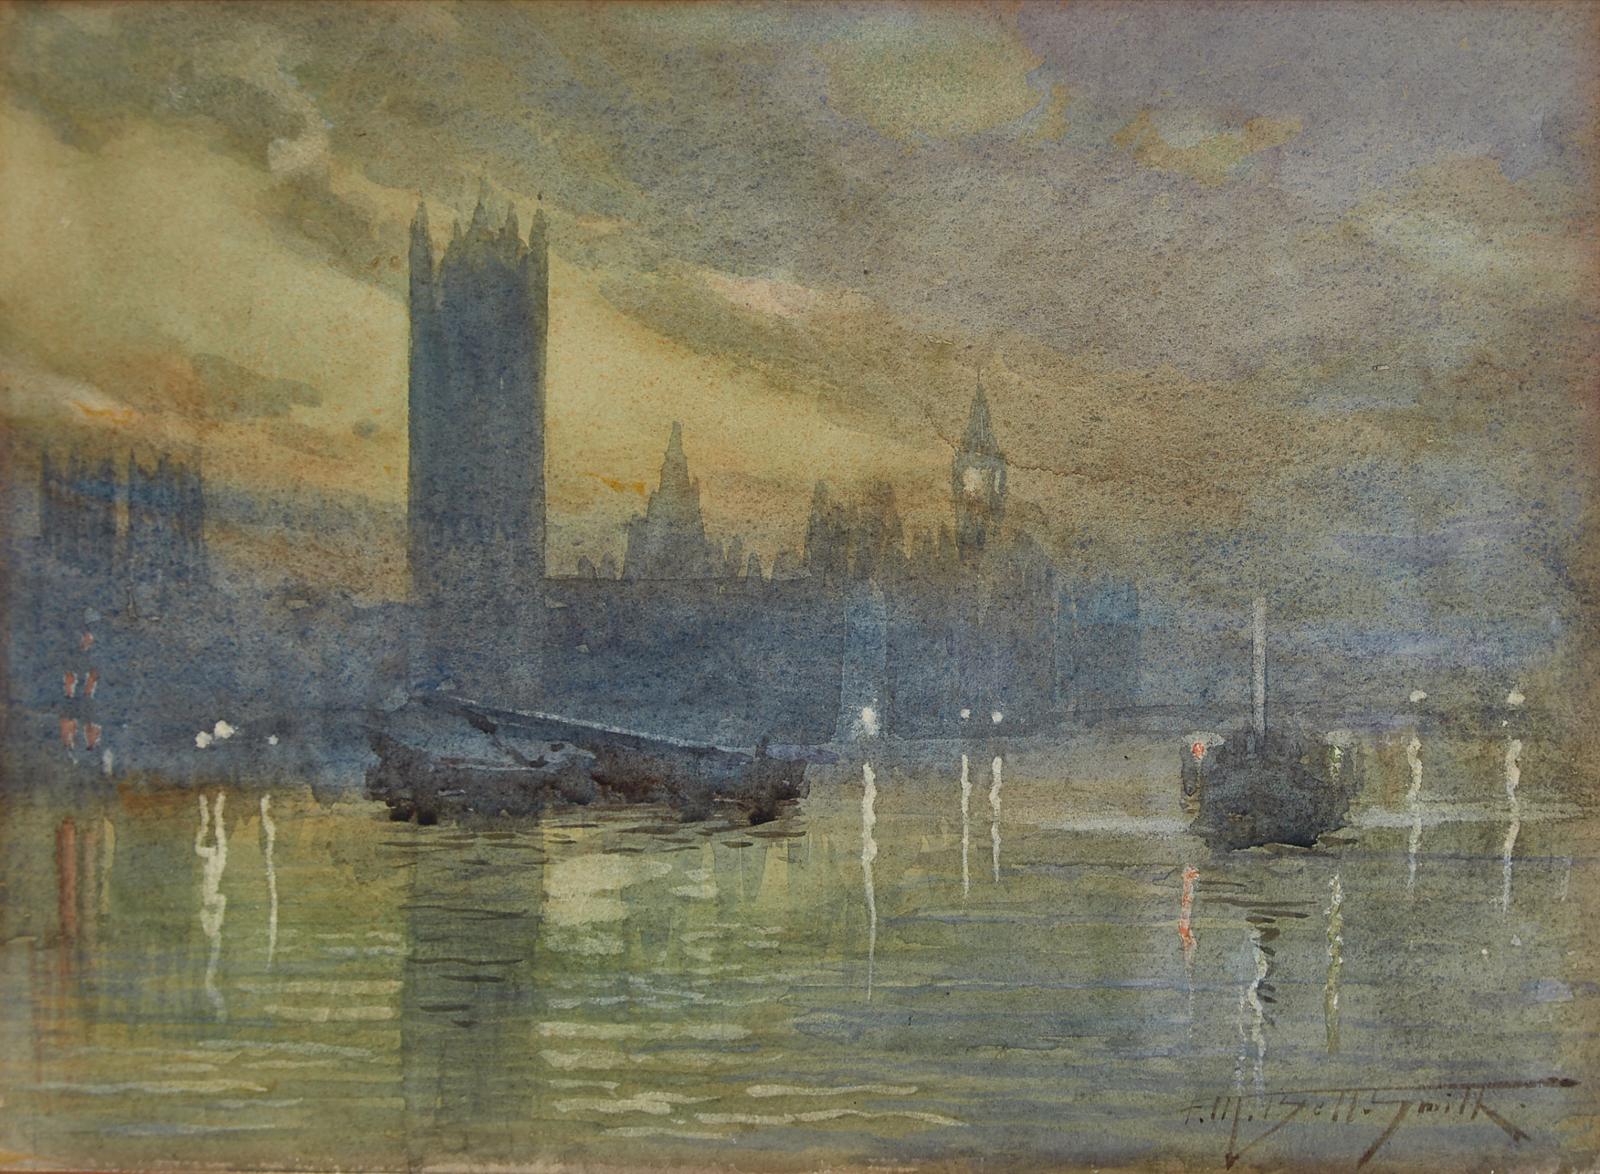 Frederic Martlett Bell-Smith (1846-1923) - Lights On The River Near Westminister